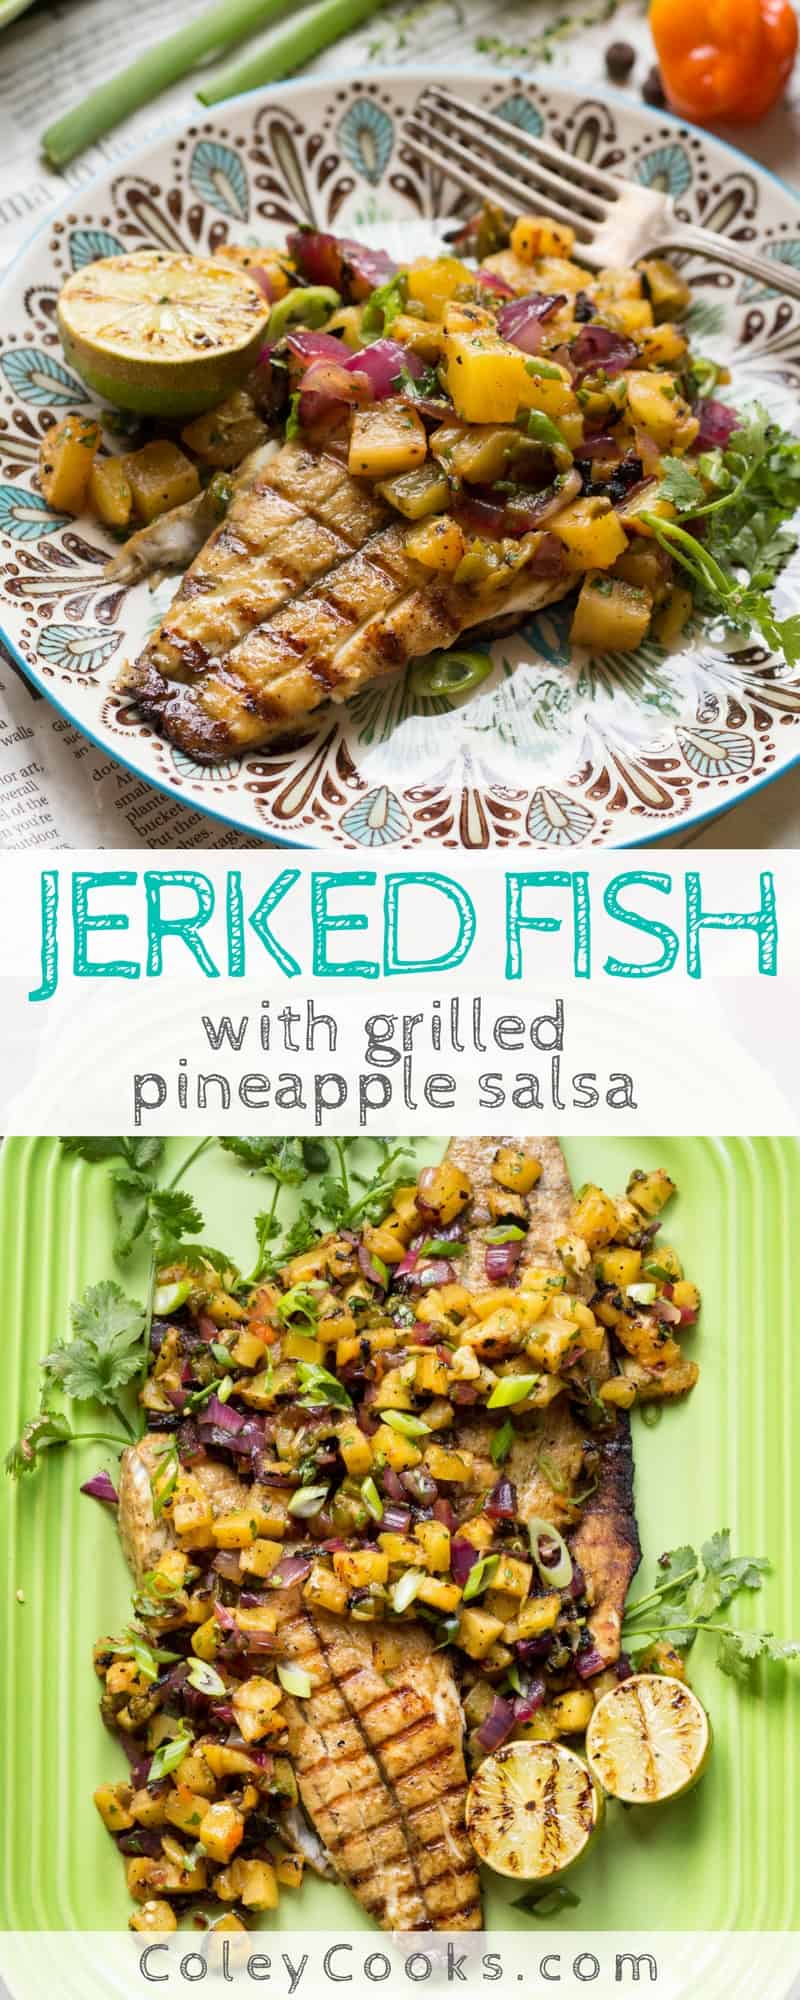 JERKED FISH with GRILLED PINEAPPLE SALSA | A light and flavorful summertime dinner! The Jamaican jerk marinade is spicy and smoky, and the grilled pineapple salsa gives it lots of sweet, tangy flavor. | ColeyCooks.com